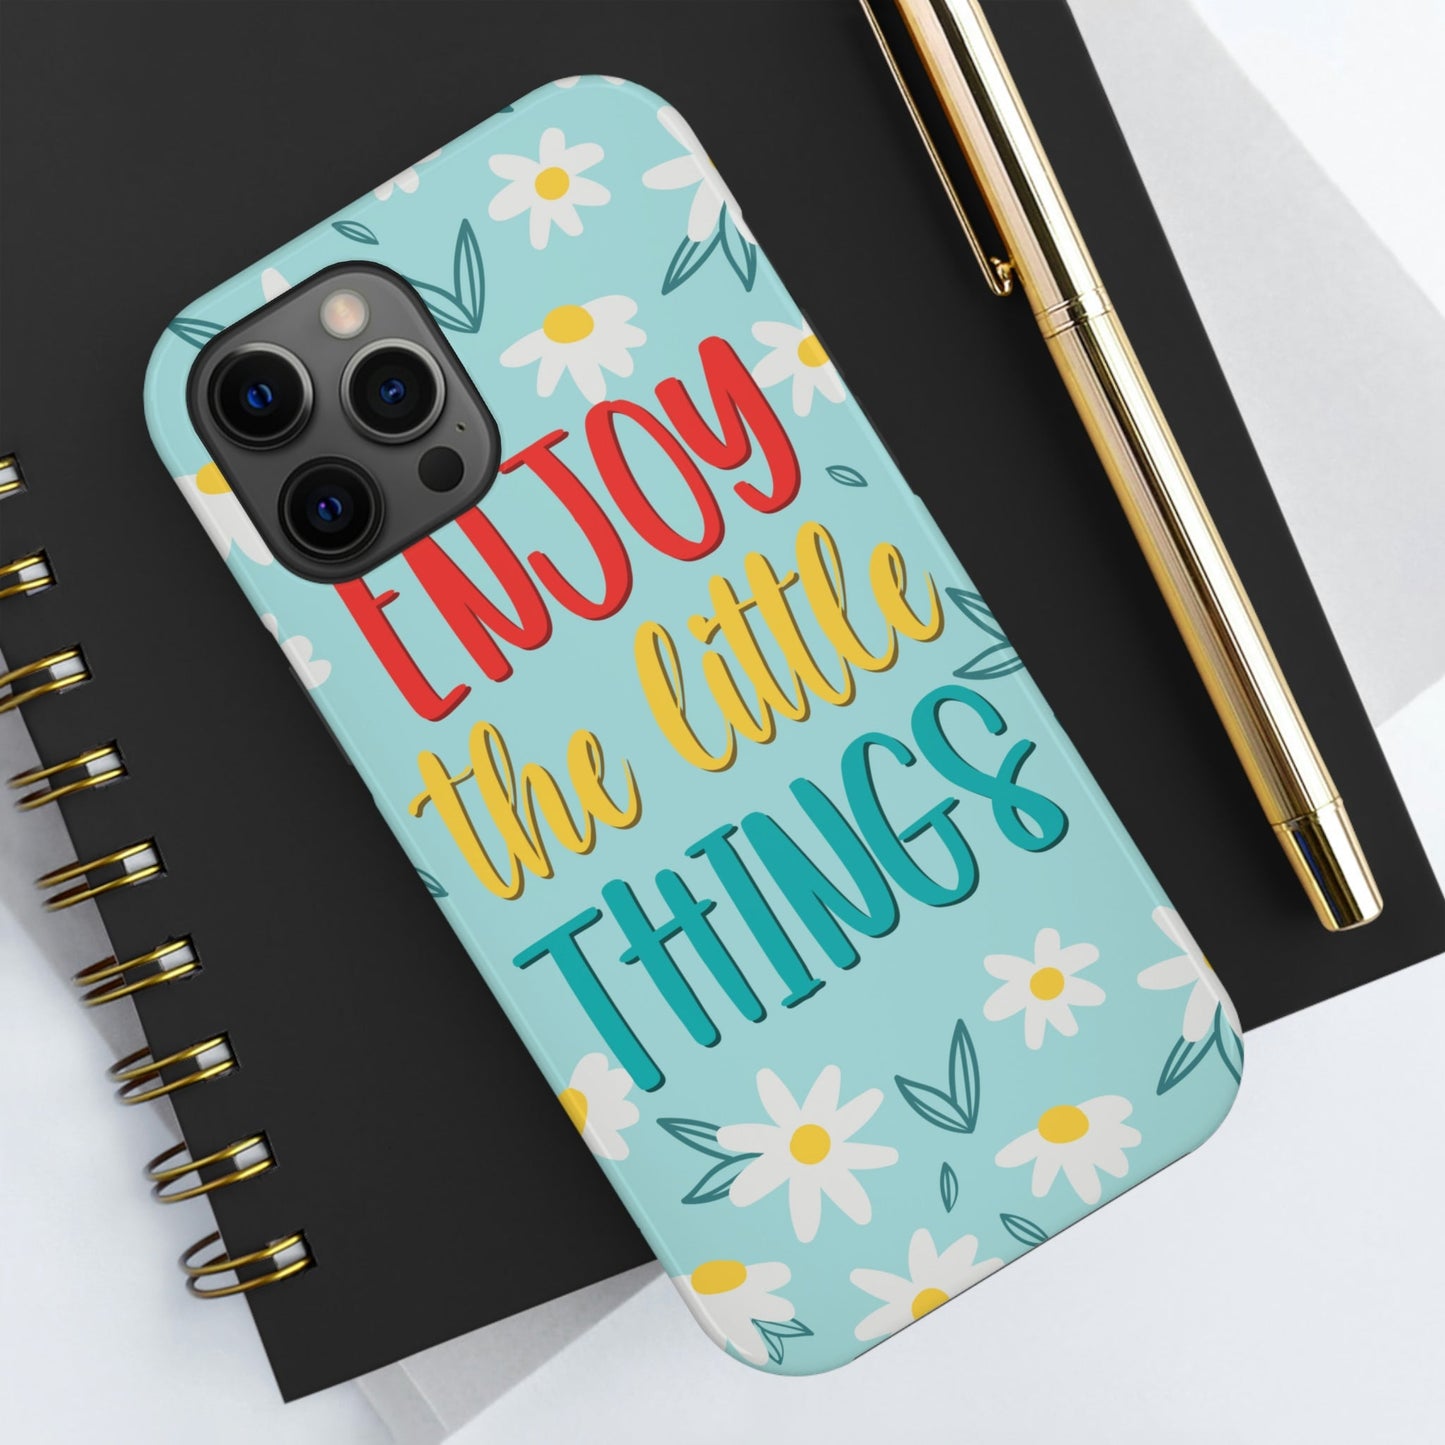 Enjoy The Little Things Art Tough Phone Cases Case-Mate Ichaku [Perfect Gifts Selection]